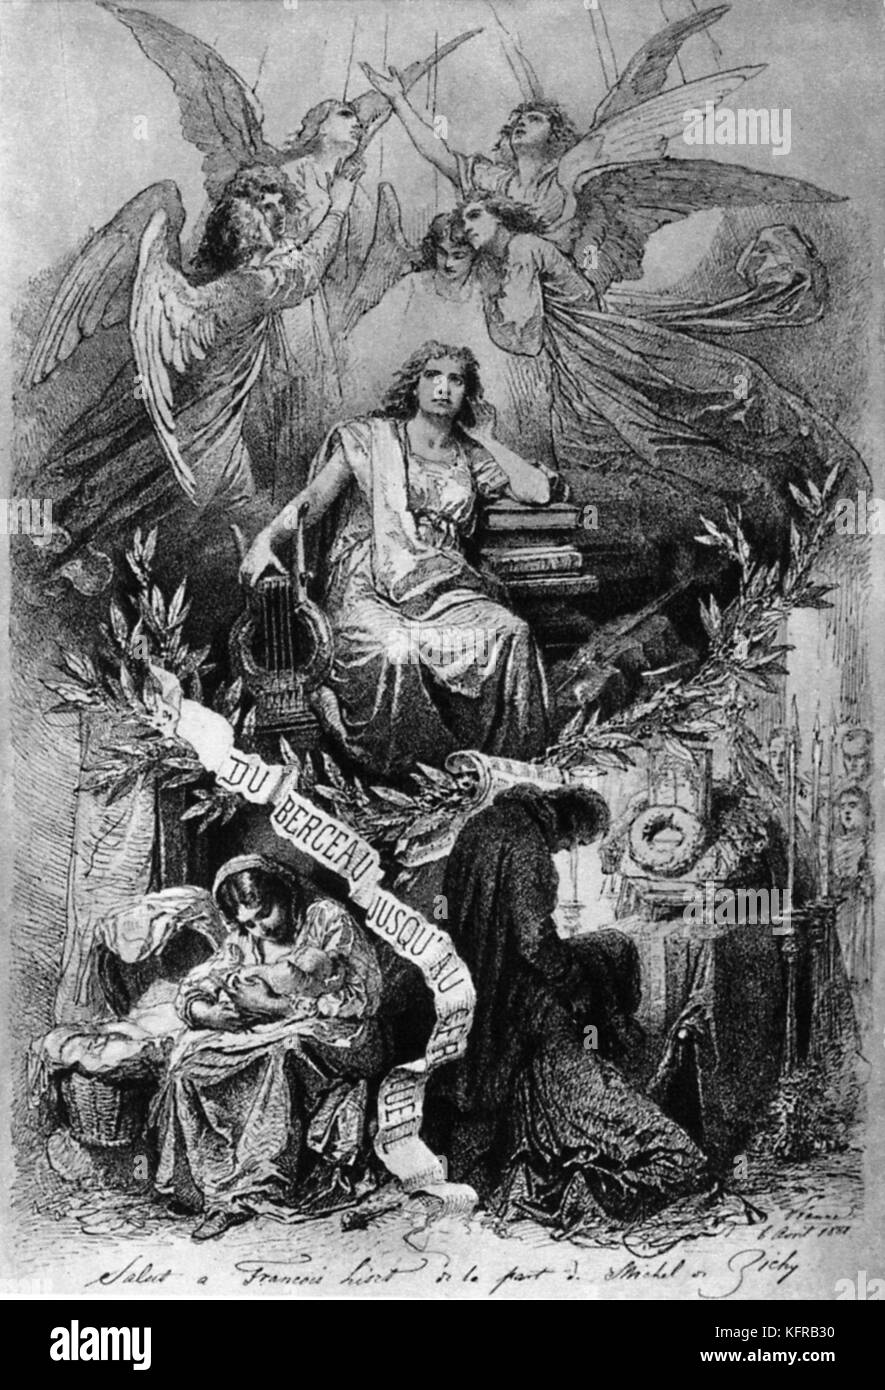 Du berceau jusqu'au cercueil (from the cradle to the grave). Franz Liszt 's Apotheosis. Engraving after a drawing by Michel de Zichy. Hungarian pianist and composer,  22 October 1811 - 31 July 1886. Stock Photo